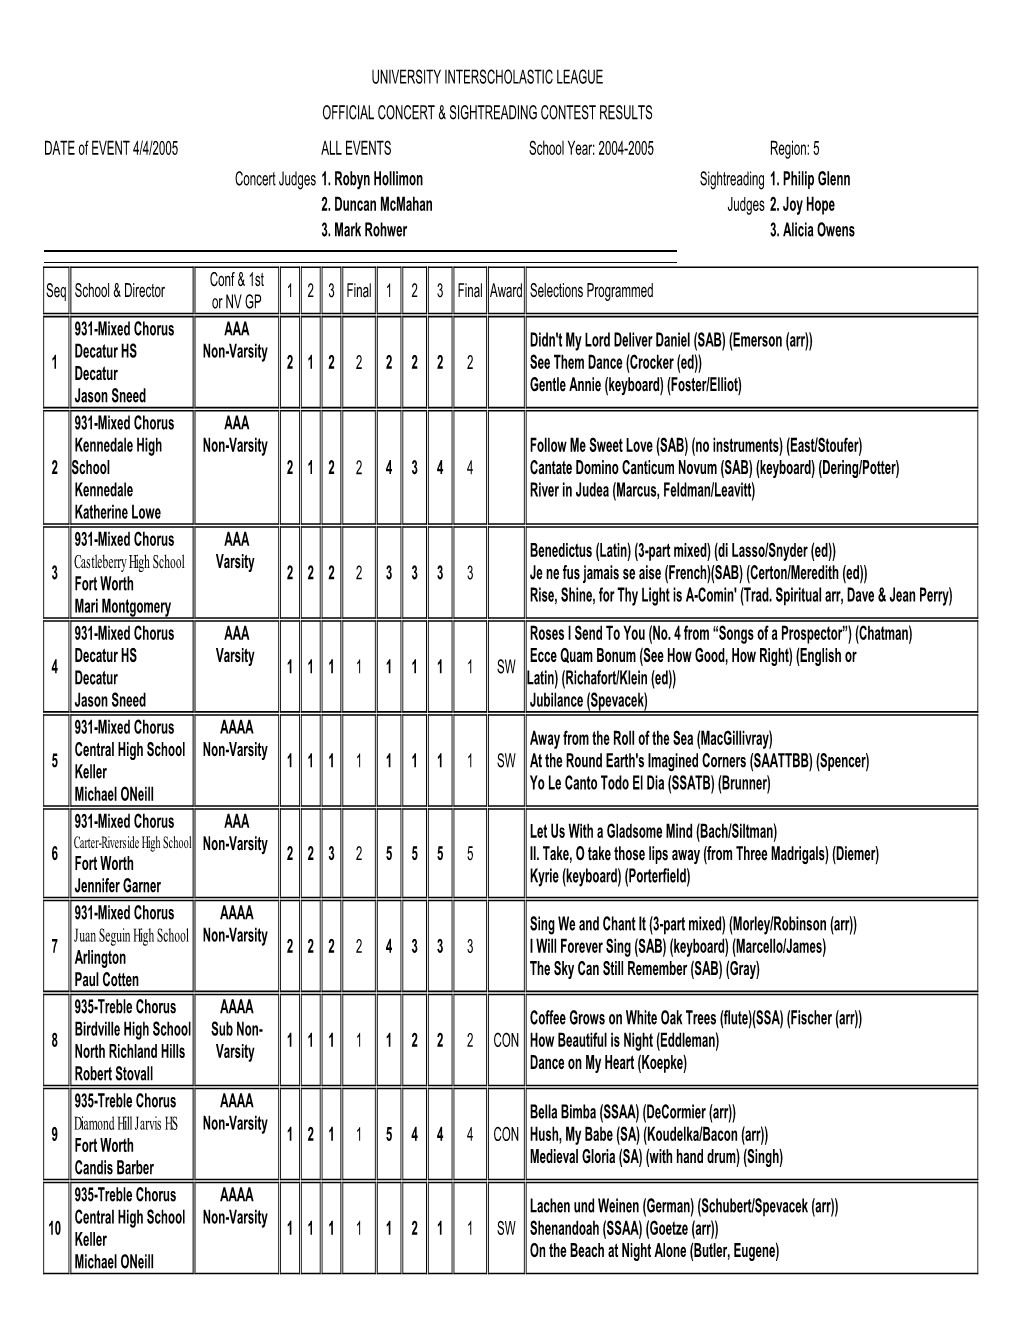 UNIVERSITY INTERSCHOLASTIC LEAGUE OFFICIAL CONCERT & SIGHTREADING CONTEST RESULTS DATE of EVENT 4/4/2005 ALL EVENTS School Year: 2004-2005 Region: 5 Concert Judges 1